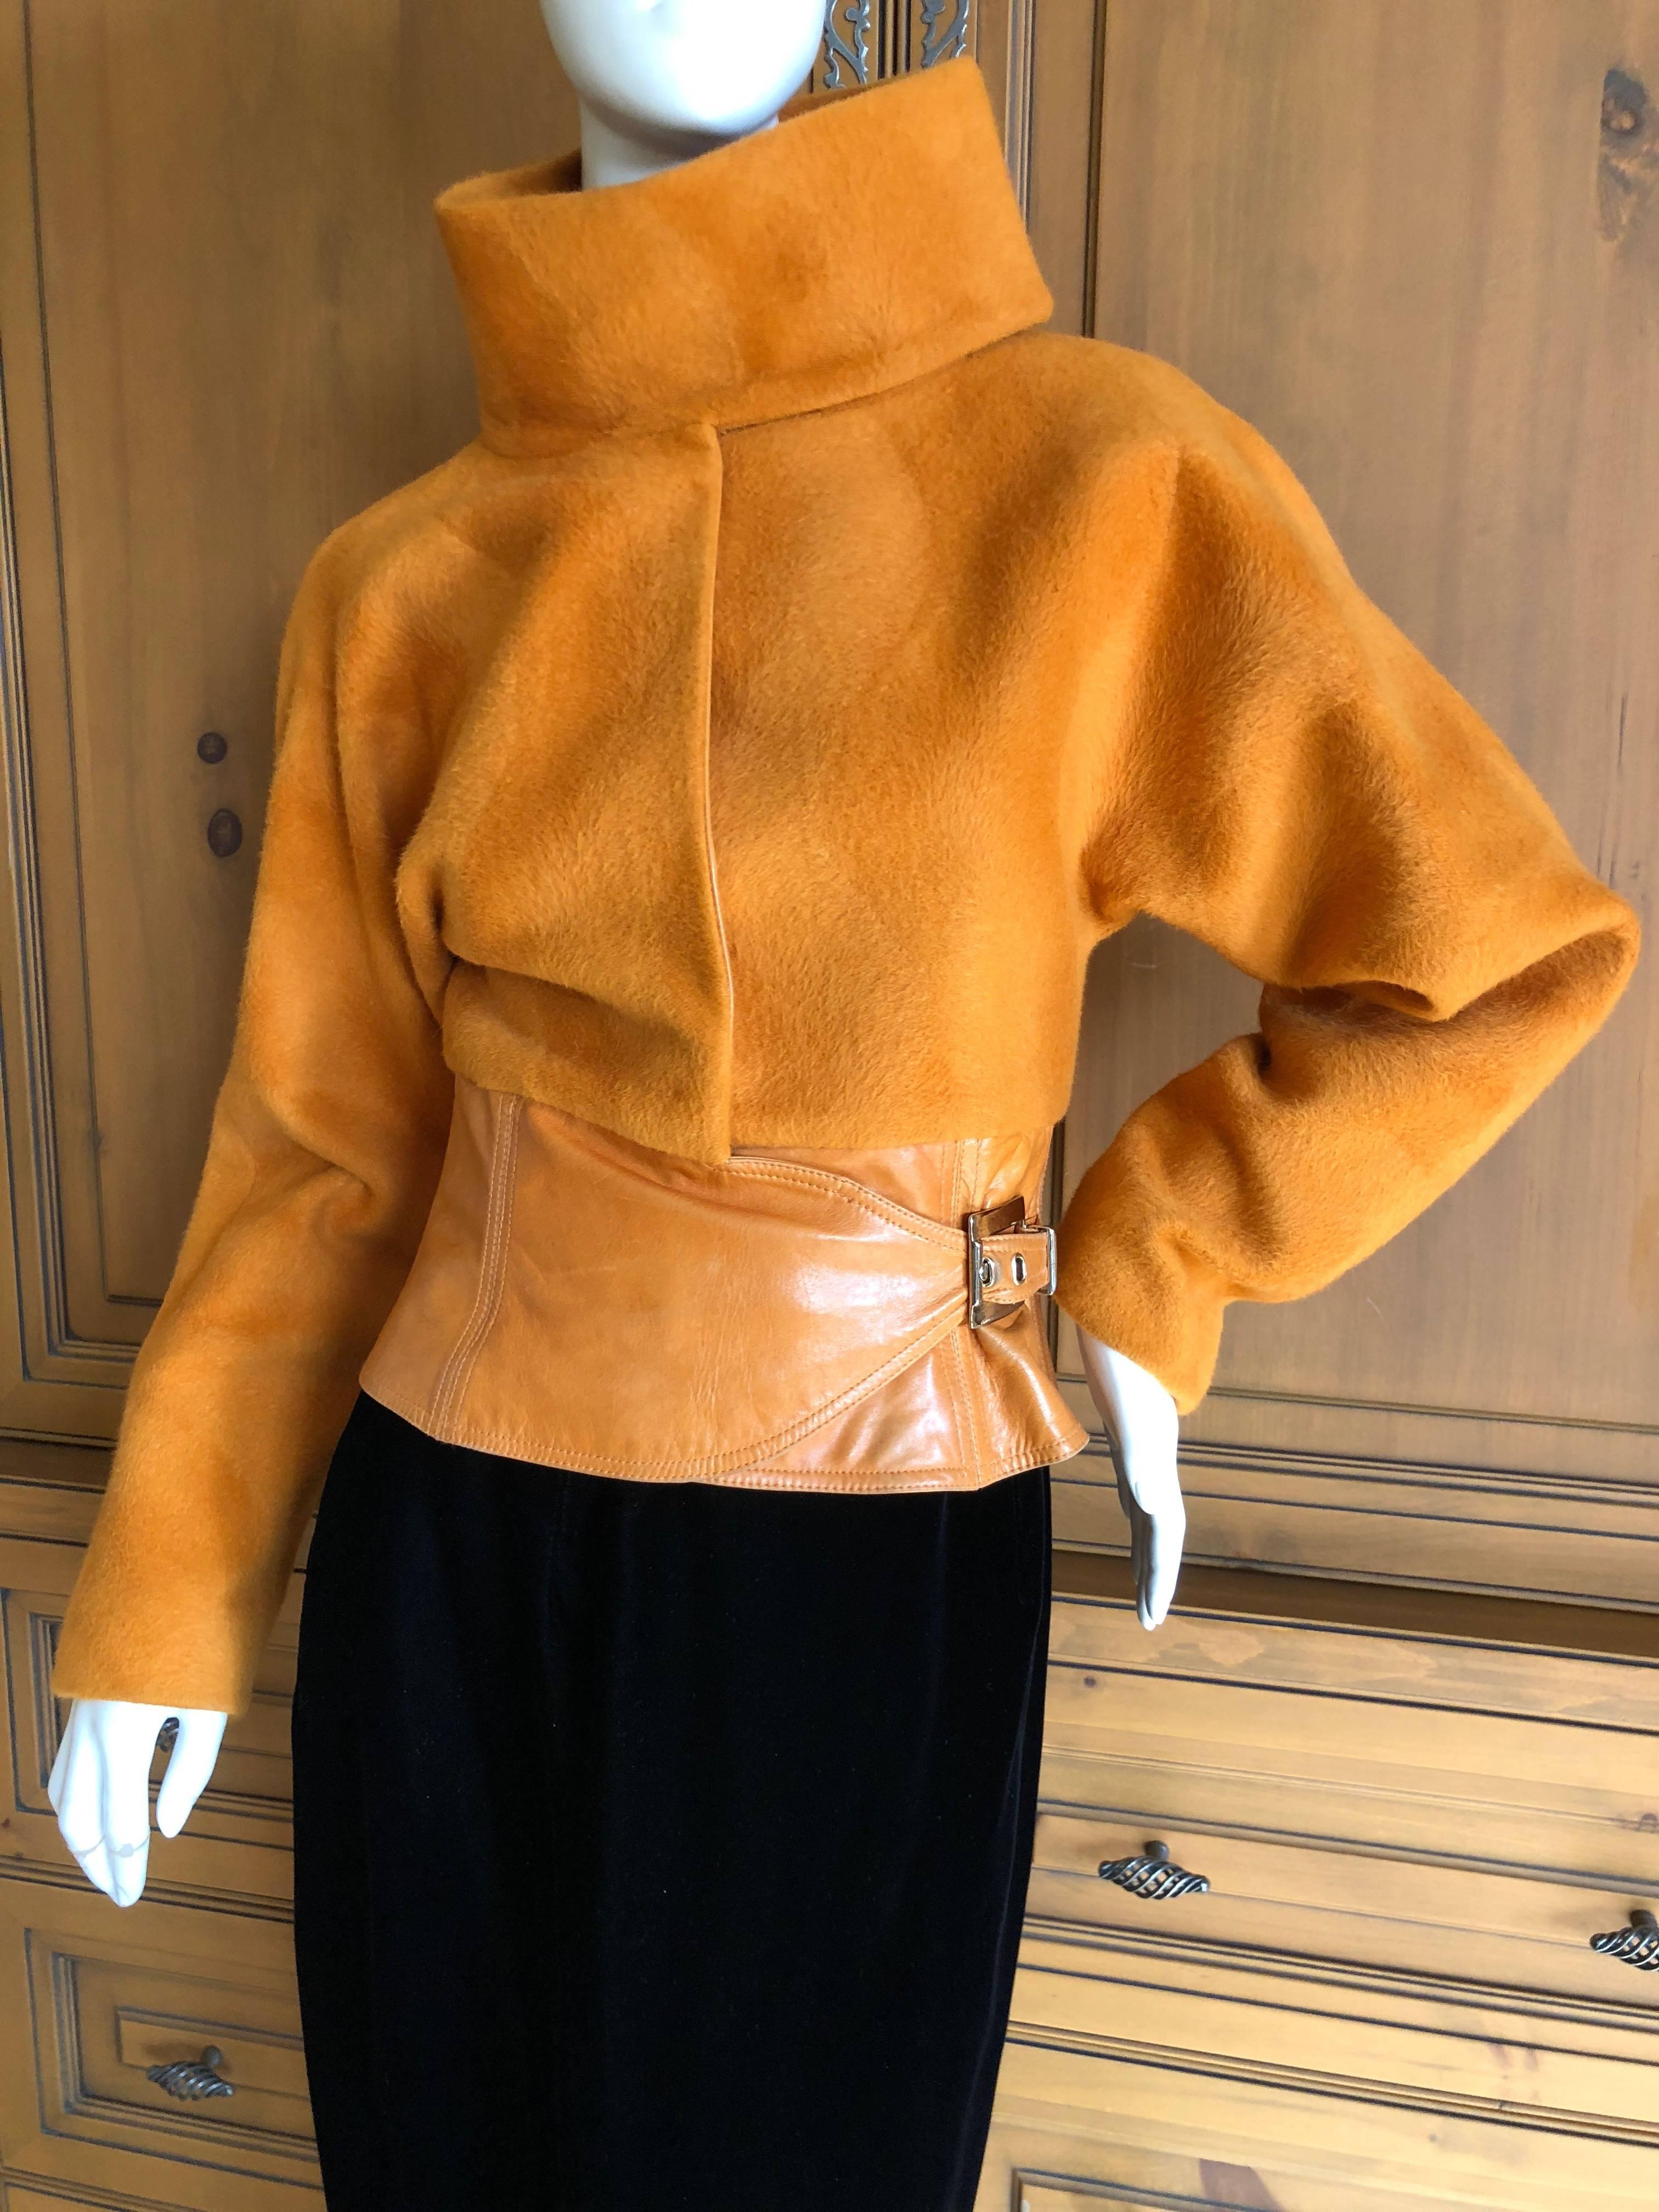 Gianni Versace Couture 1980's Luxurious Orange Wrap Jacket with Leather Trim For Sale 2